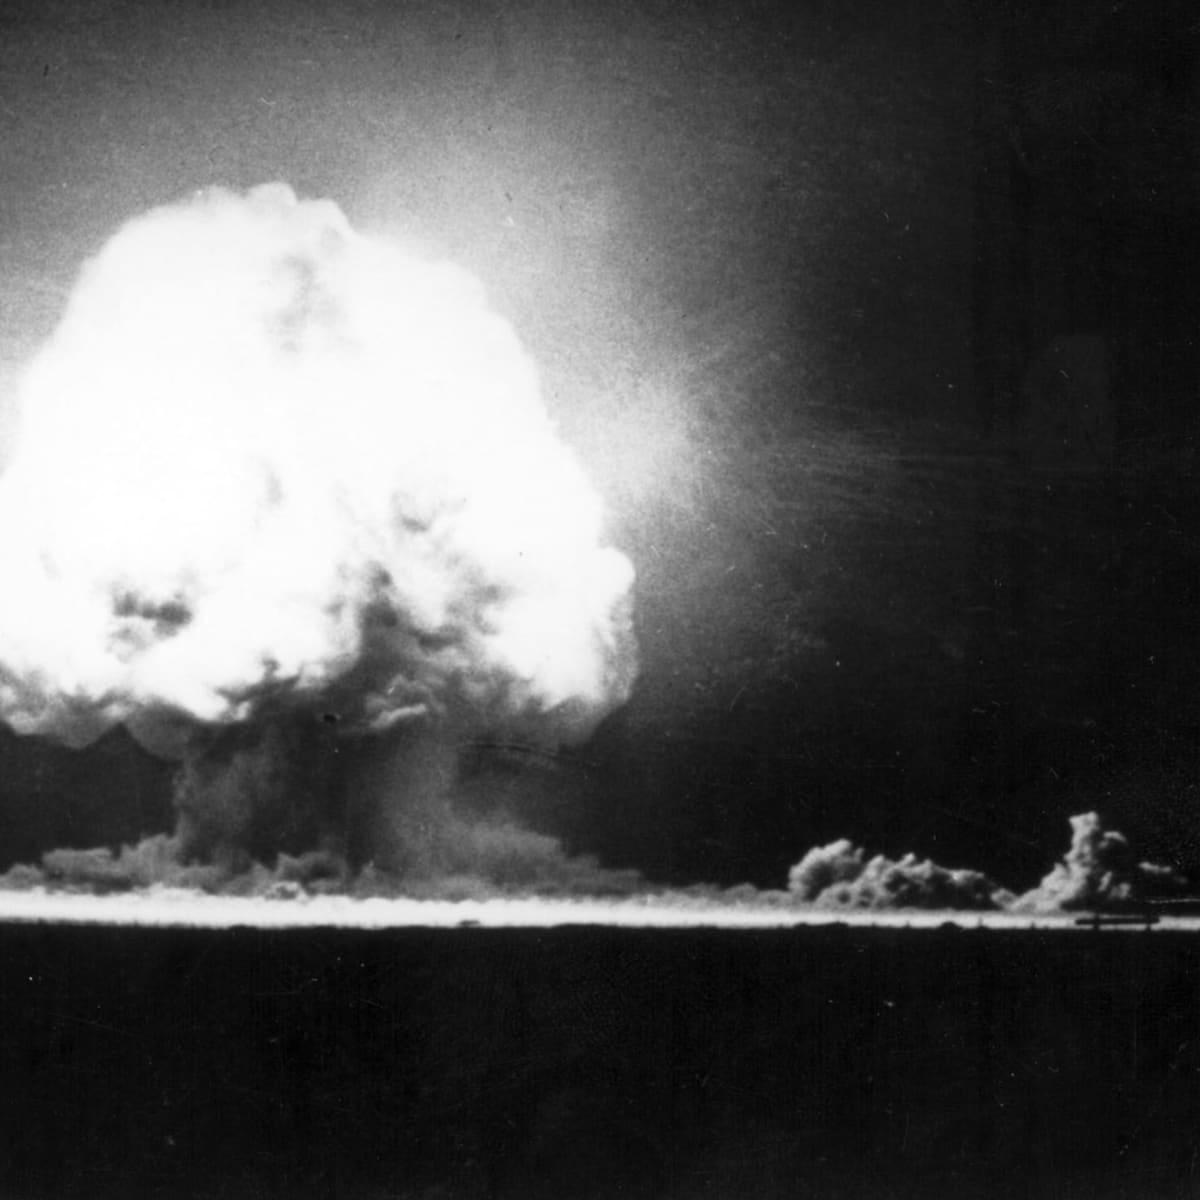 tdih-a-bomb-testing-gettyimages-3091730